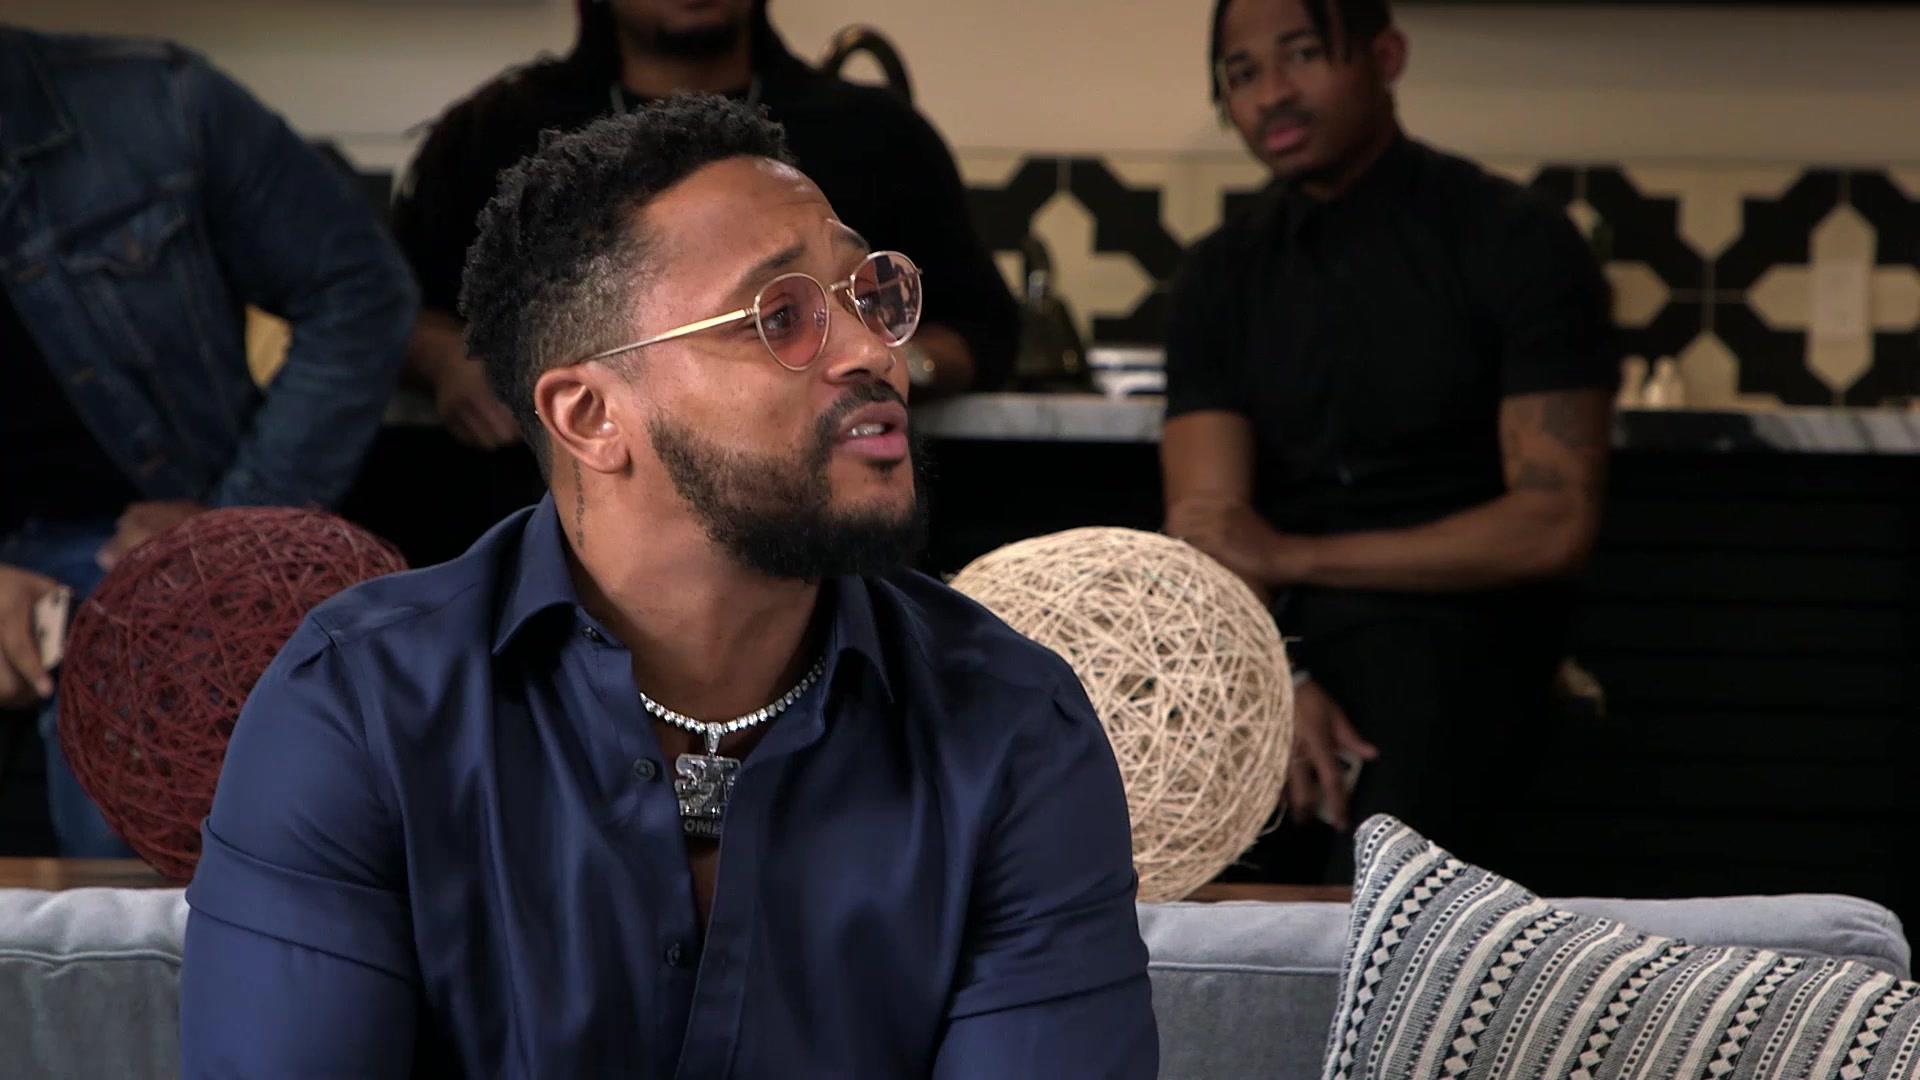 Watch Sneak Peek: Romeo Sits Down With The Crew | Growing Up Hip Hop Video Extras